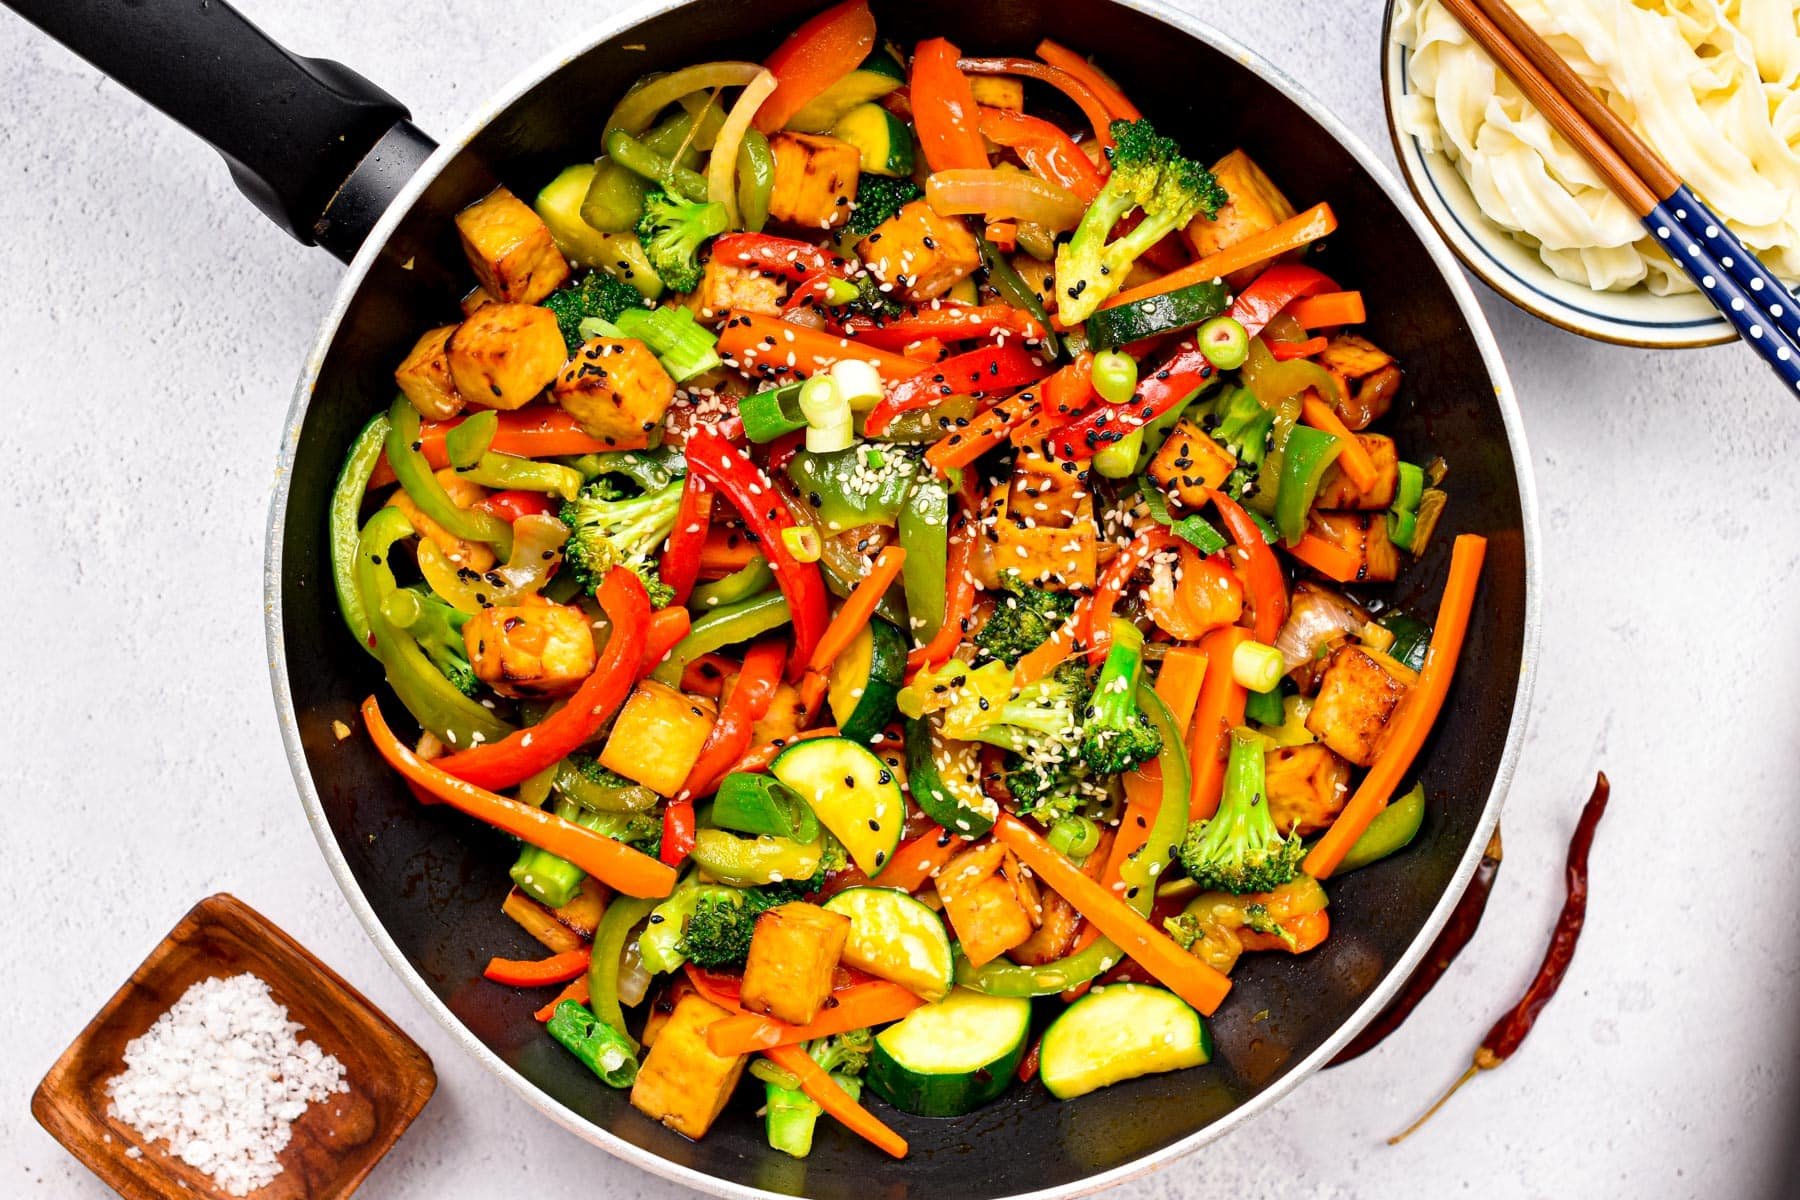 This Vegan Stir Fry is an healthy quick and easy dinner packed with more than 8 plants. Plus, it's a very fulfilling diner too packed with plant-based proteins from tofu. 